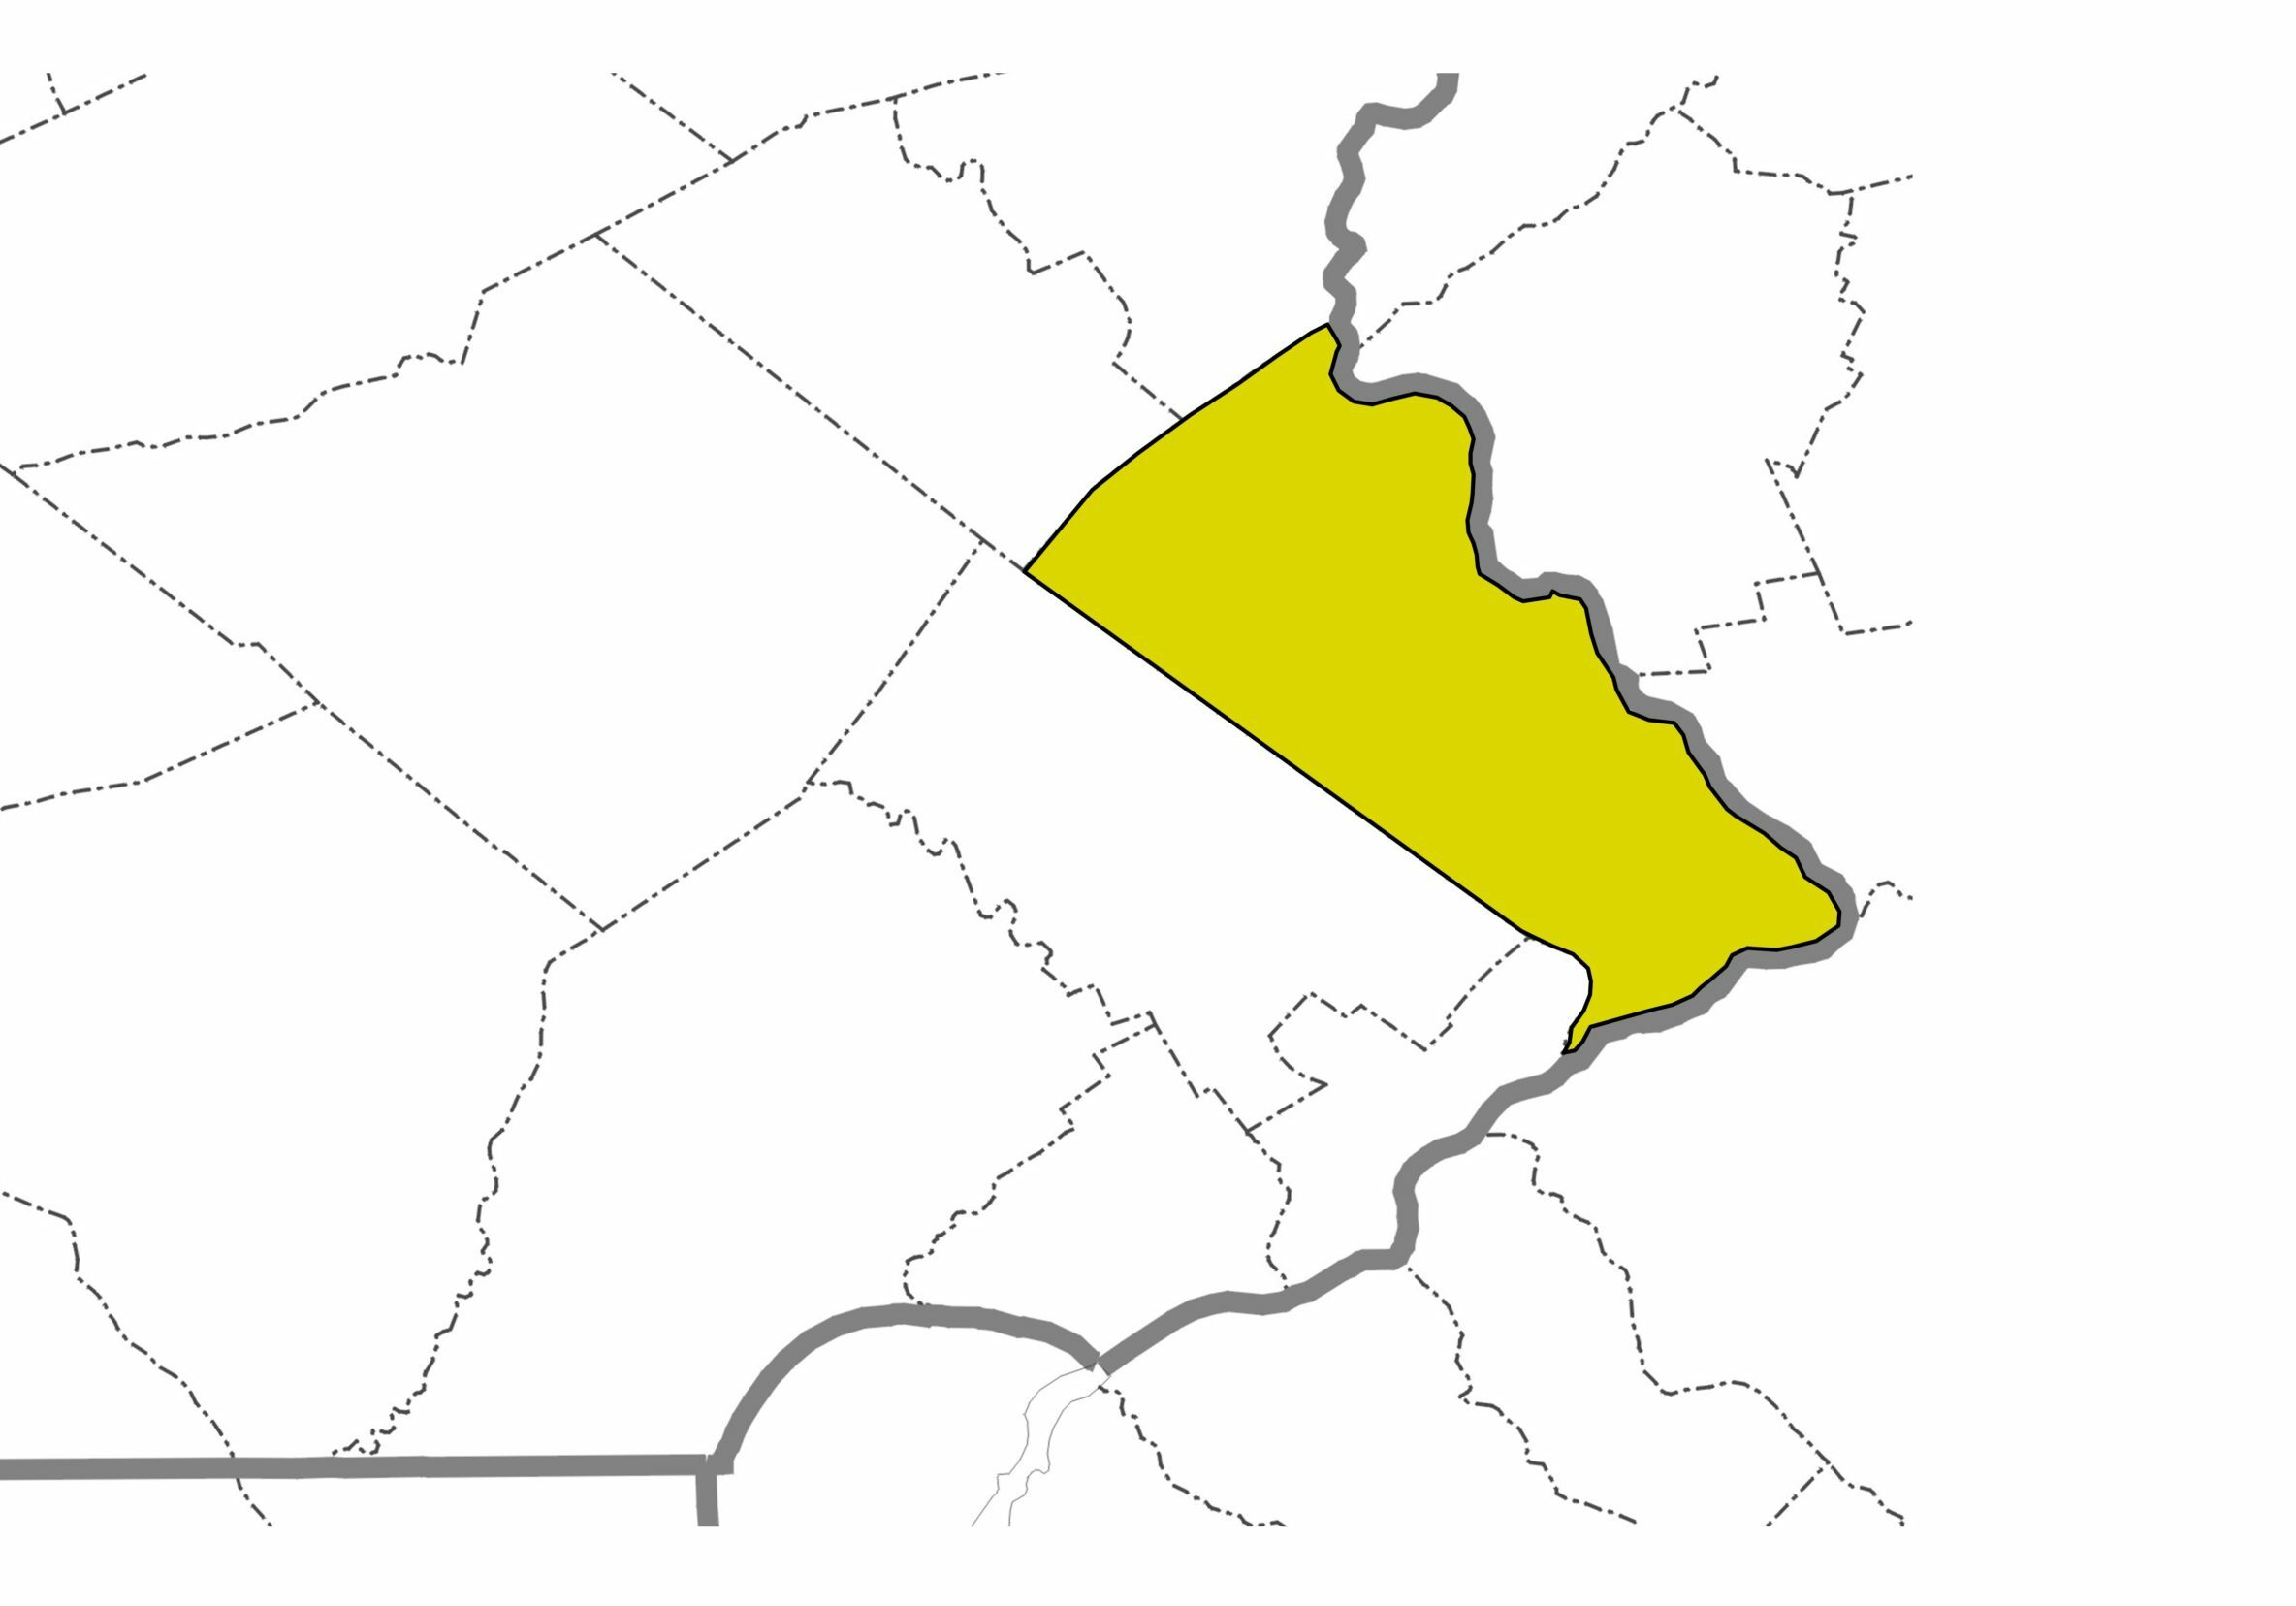 Bucks County Highlighted on Local Map That Shows County Borders